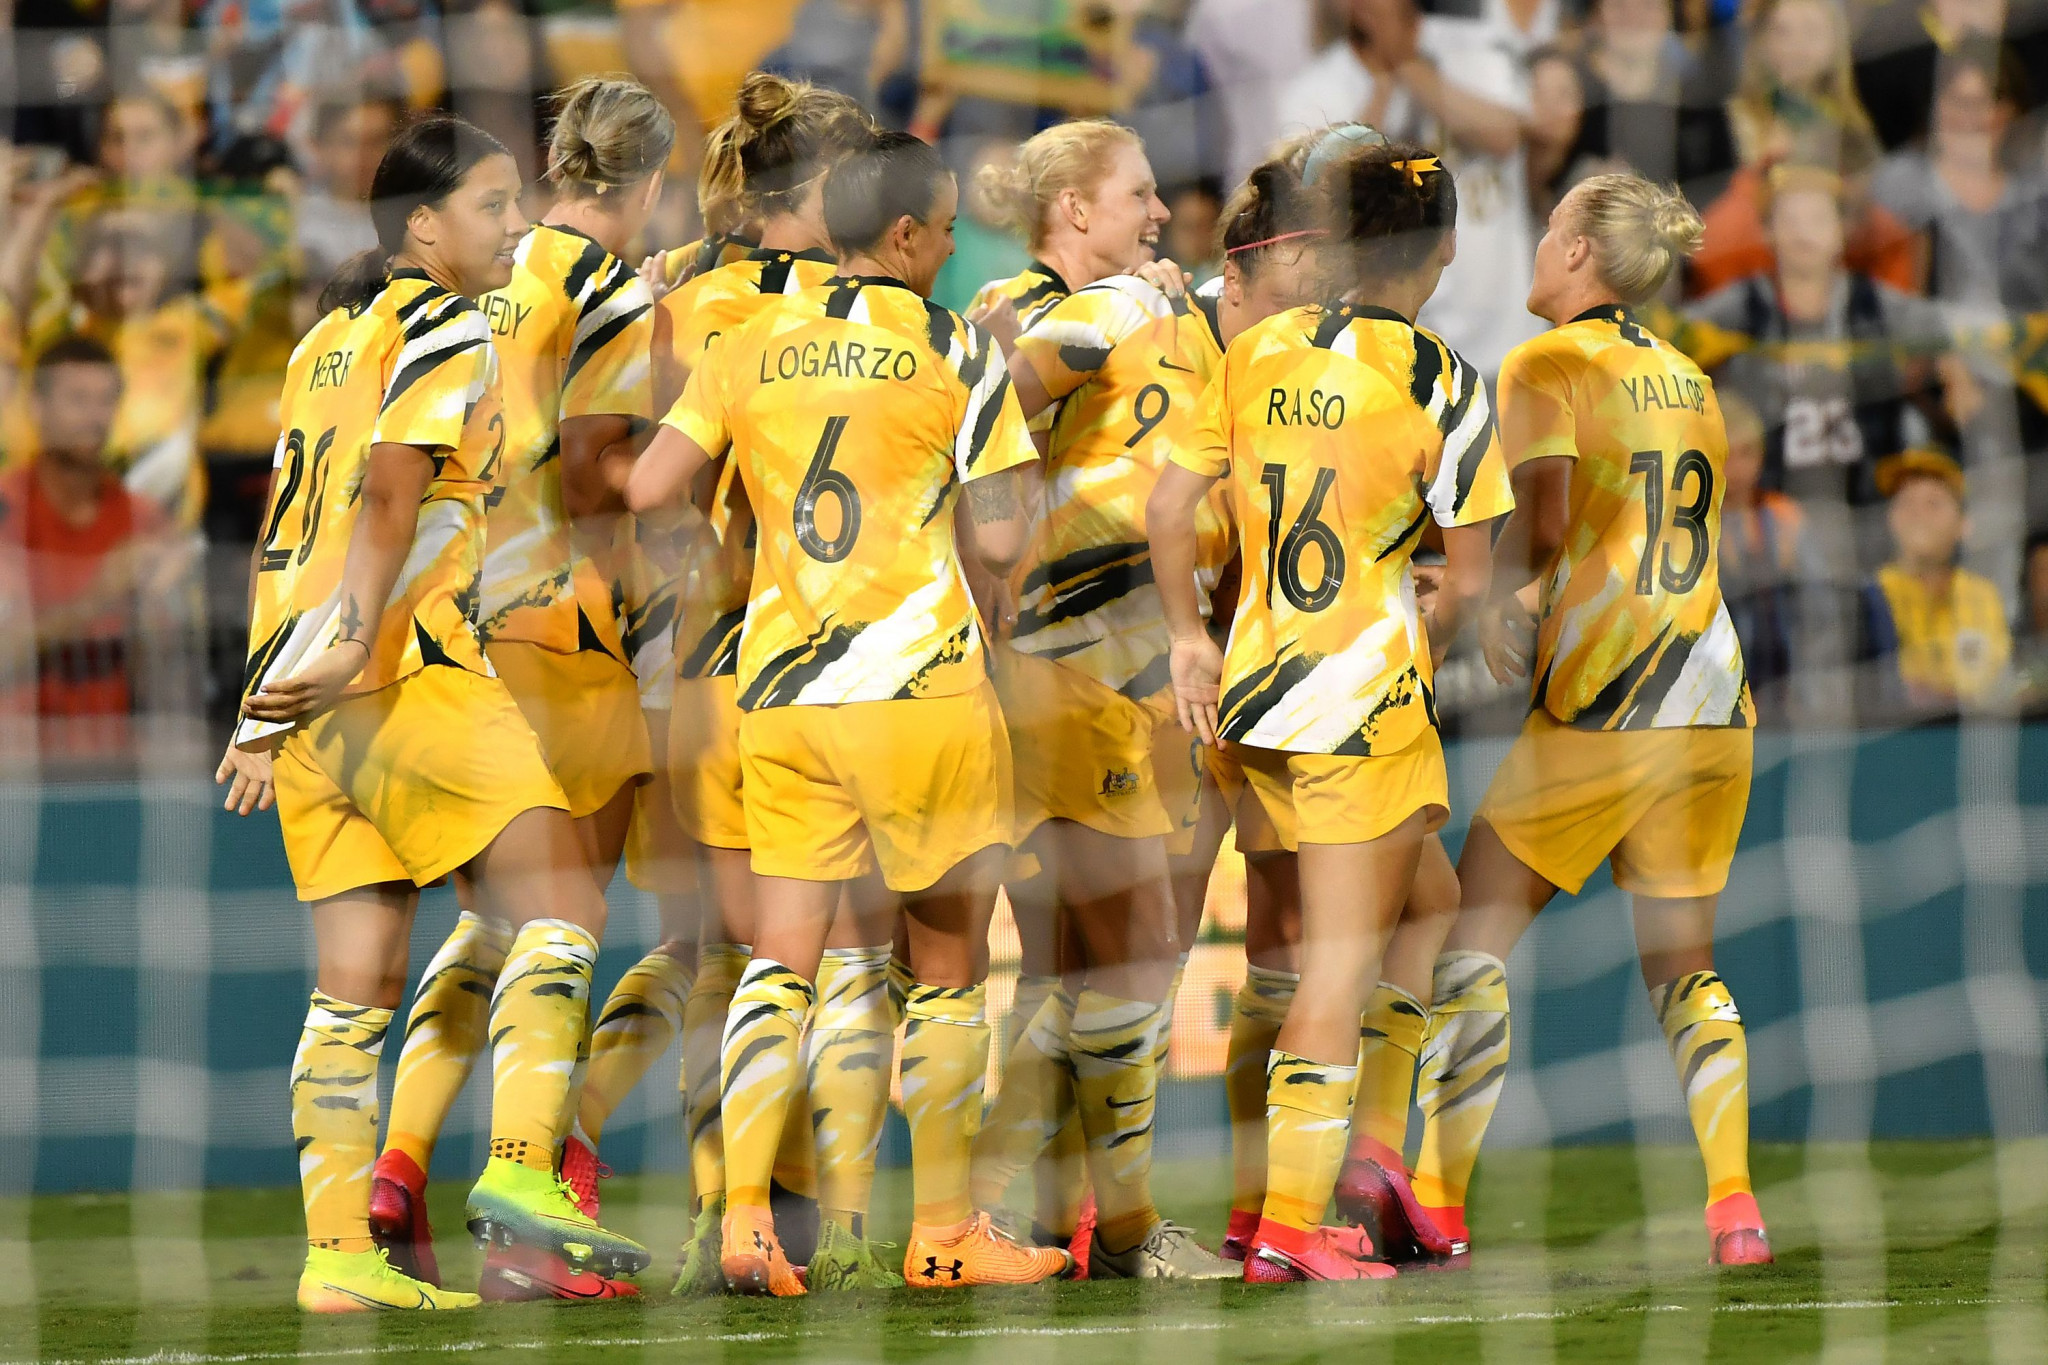 Australia have already claimed one of the two Asian spots for the women's Olympic football tournament at Tokyo 2020 after beating Vietnam last year ©Getty Images